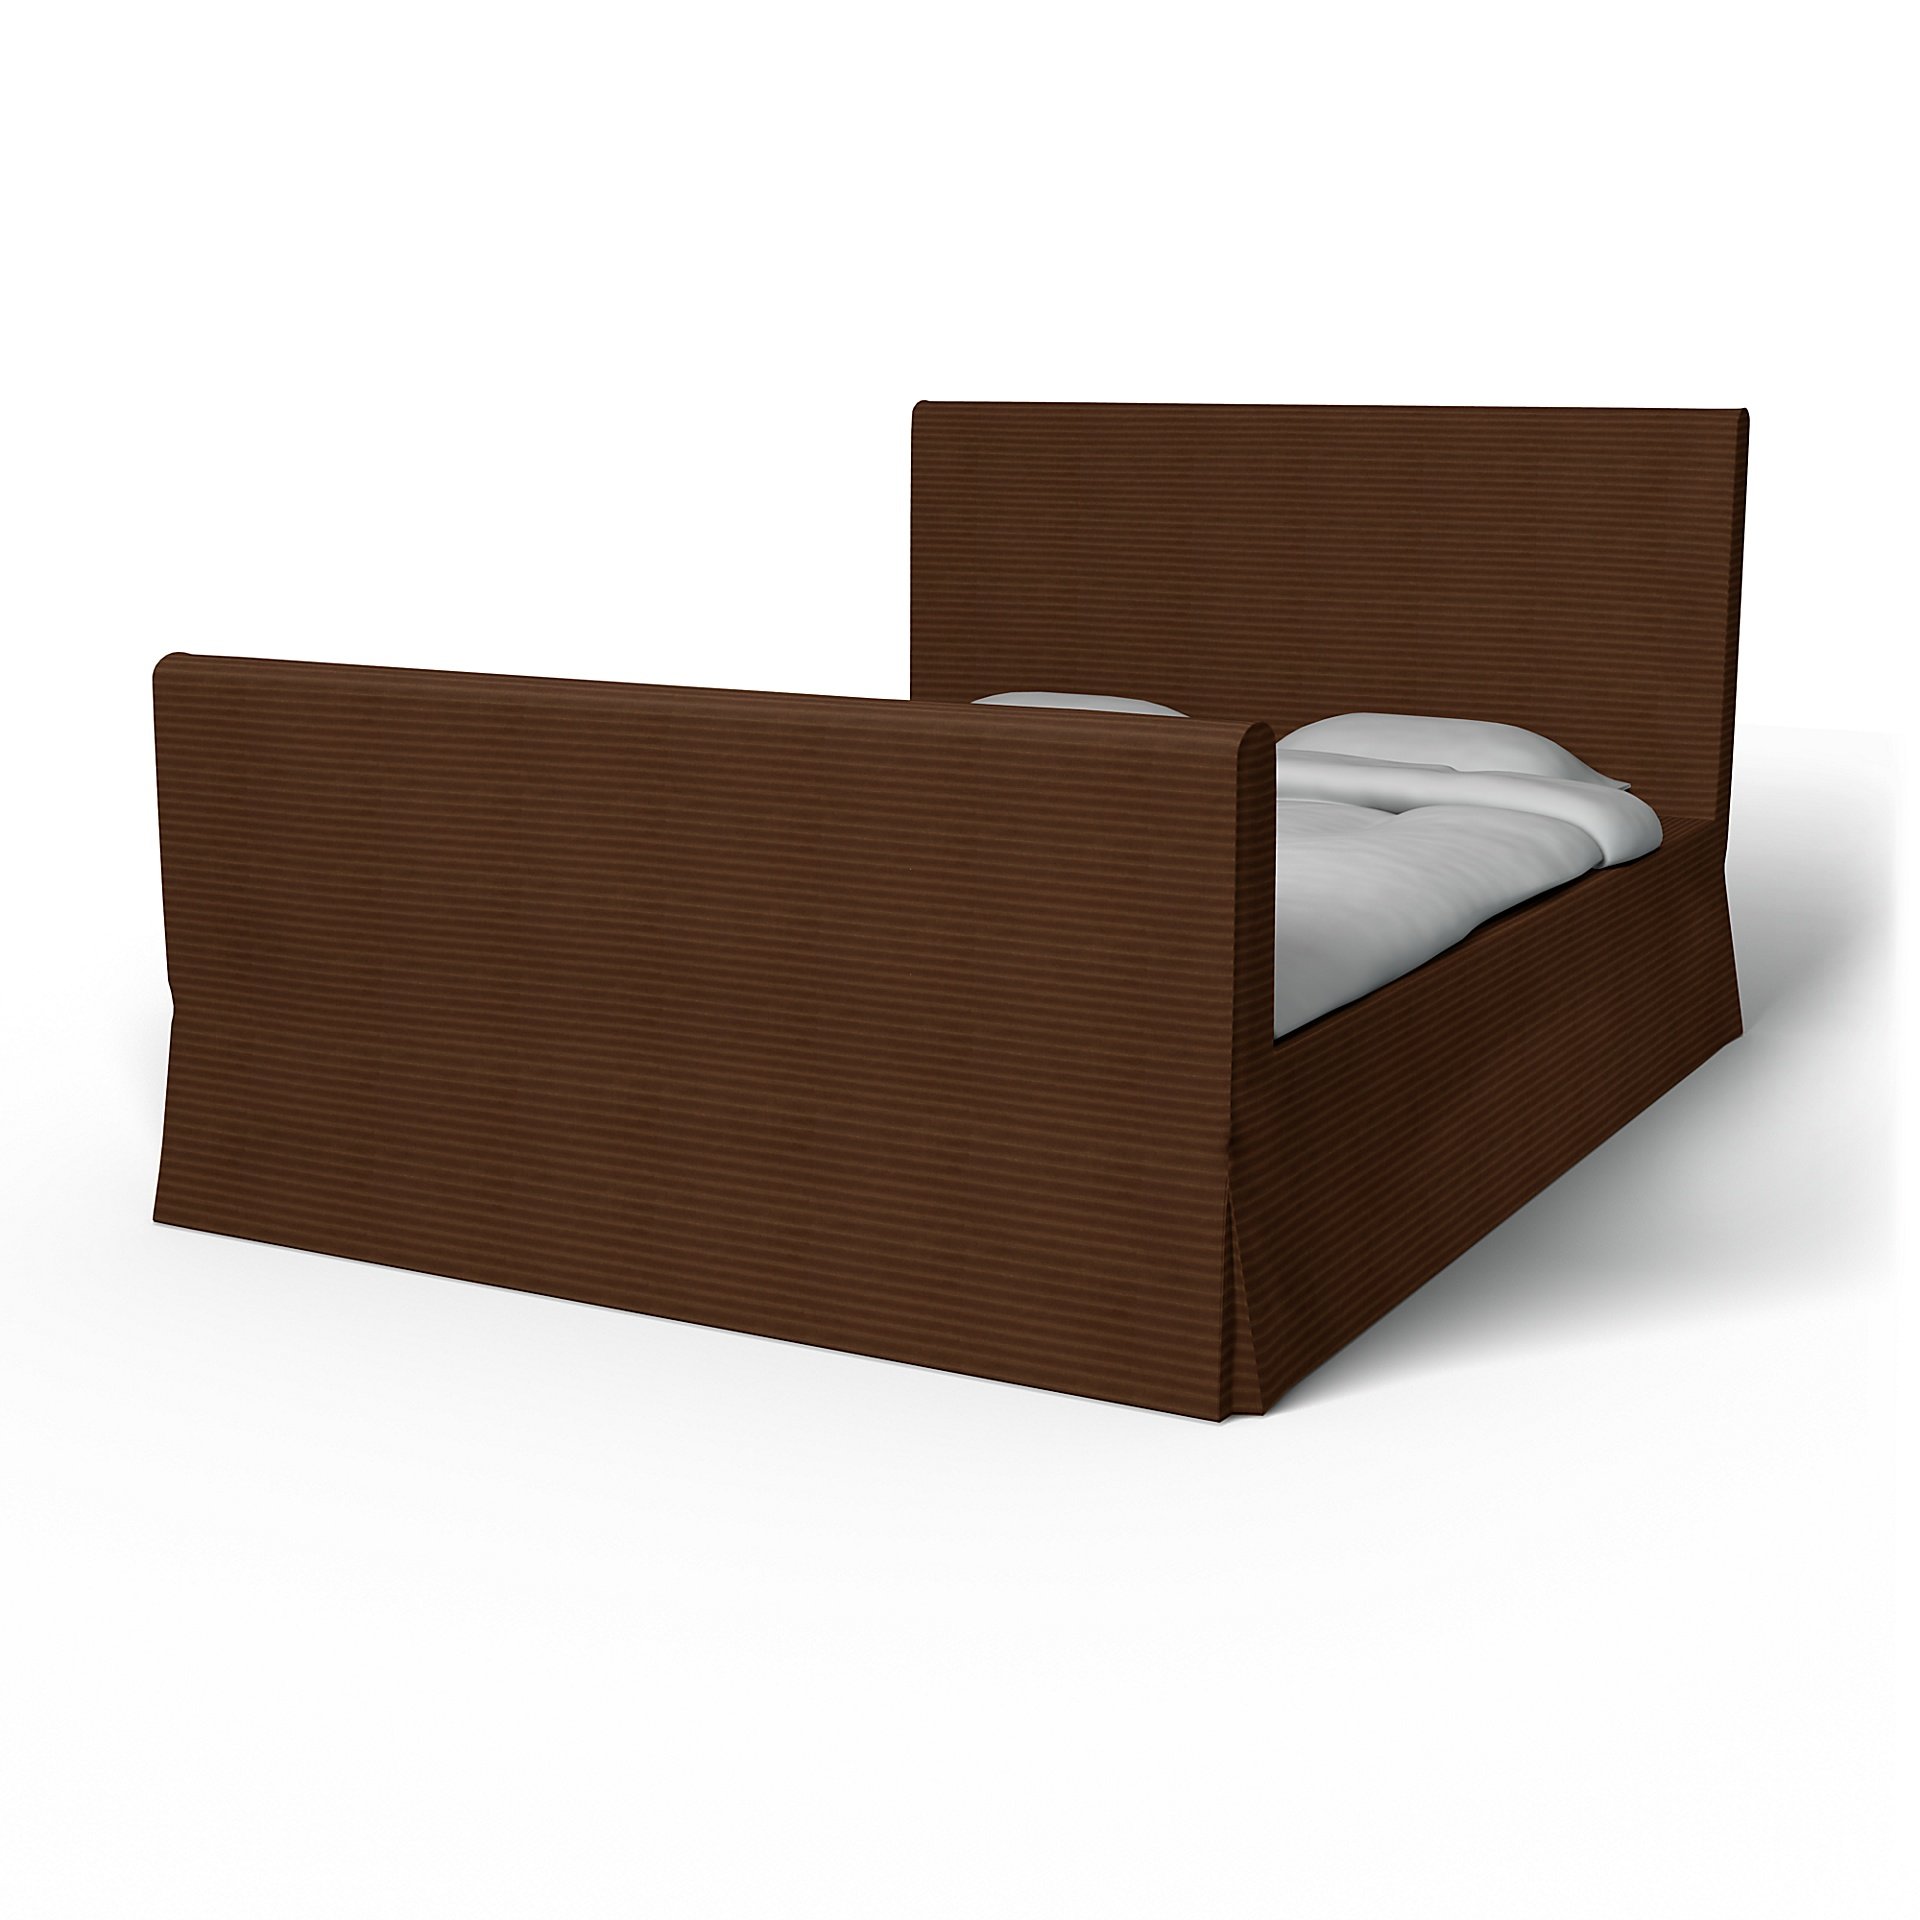 IKEA - Floro Bed Frame Cover, Chocolate Brown, Corduroy - Bemz